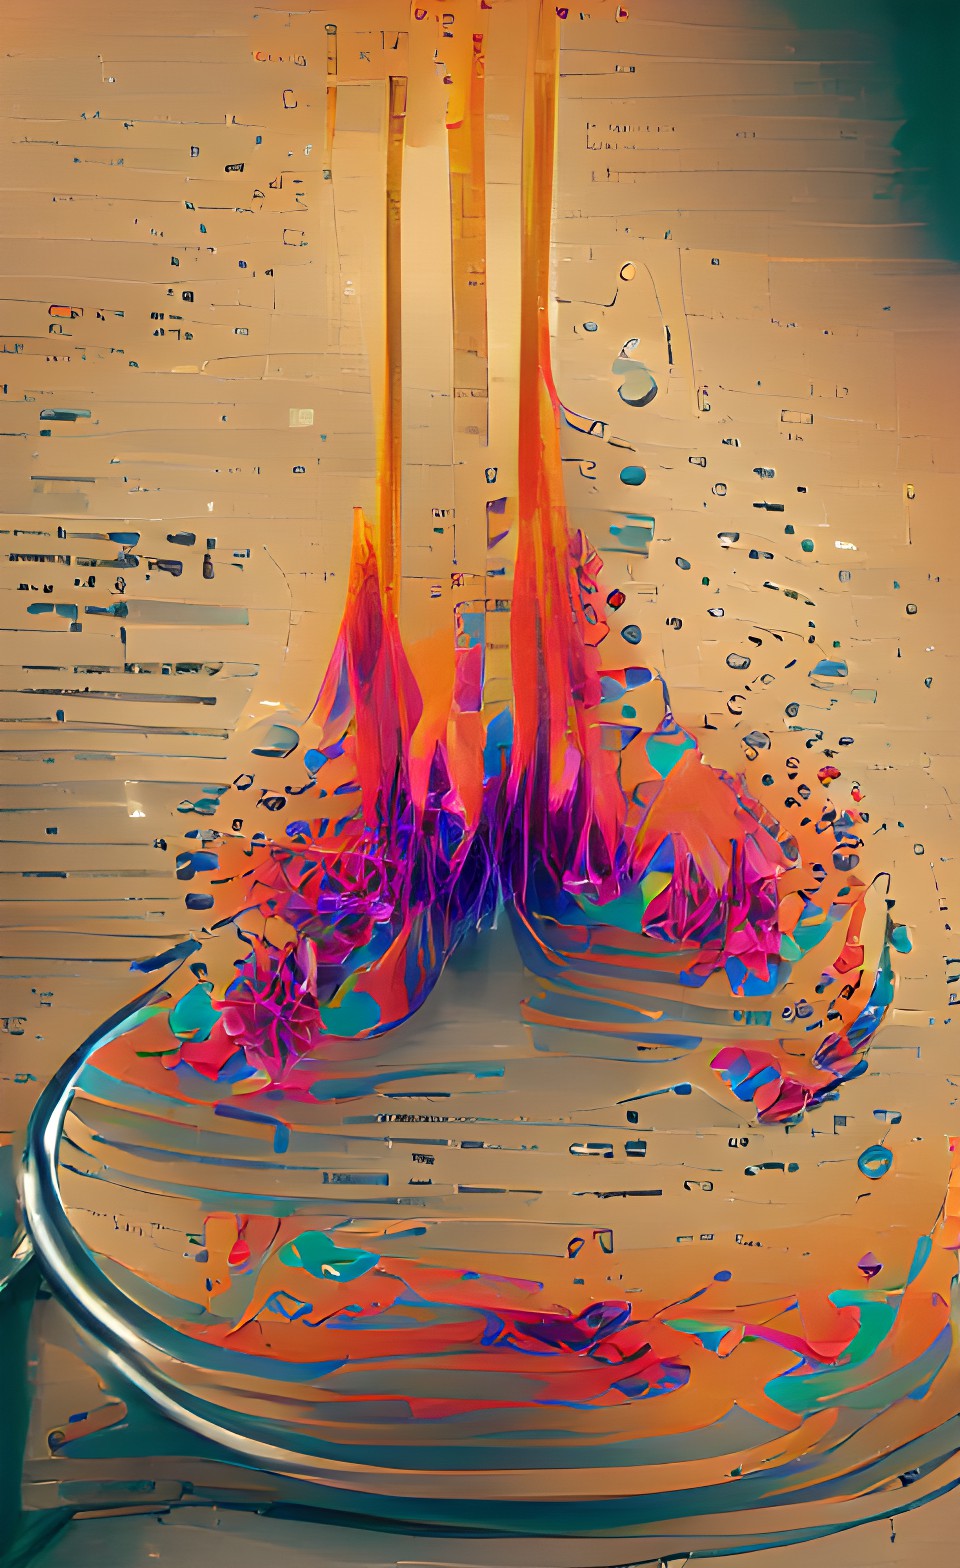 Chemical Reaction of Music